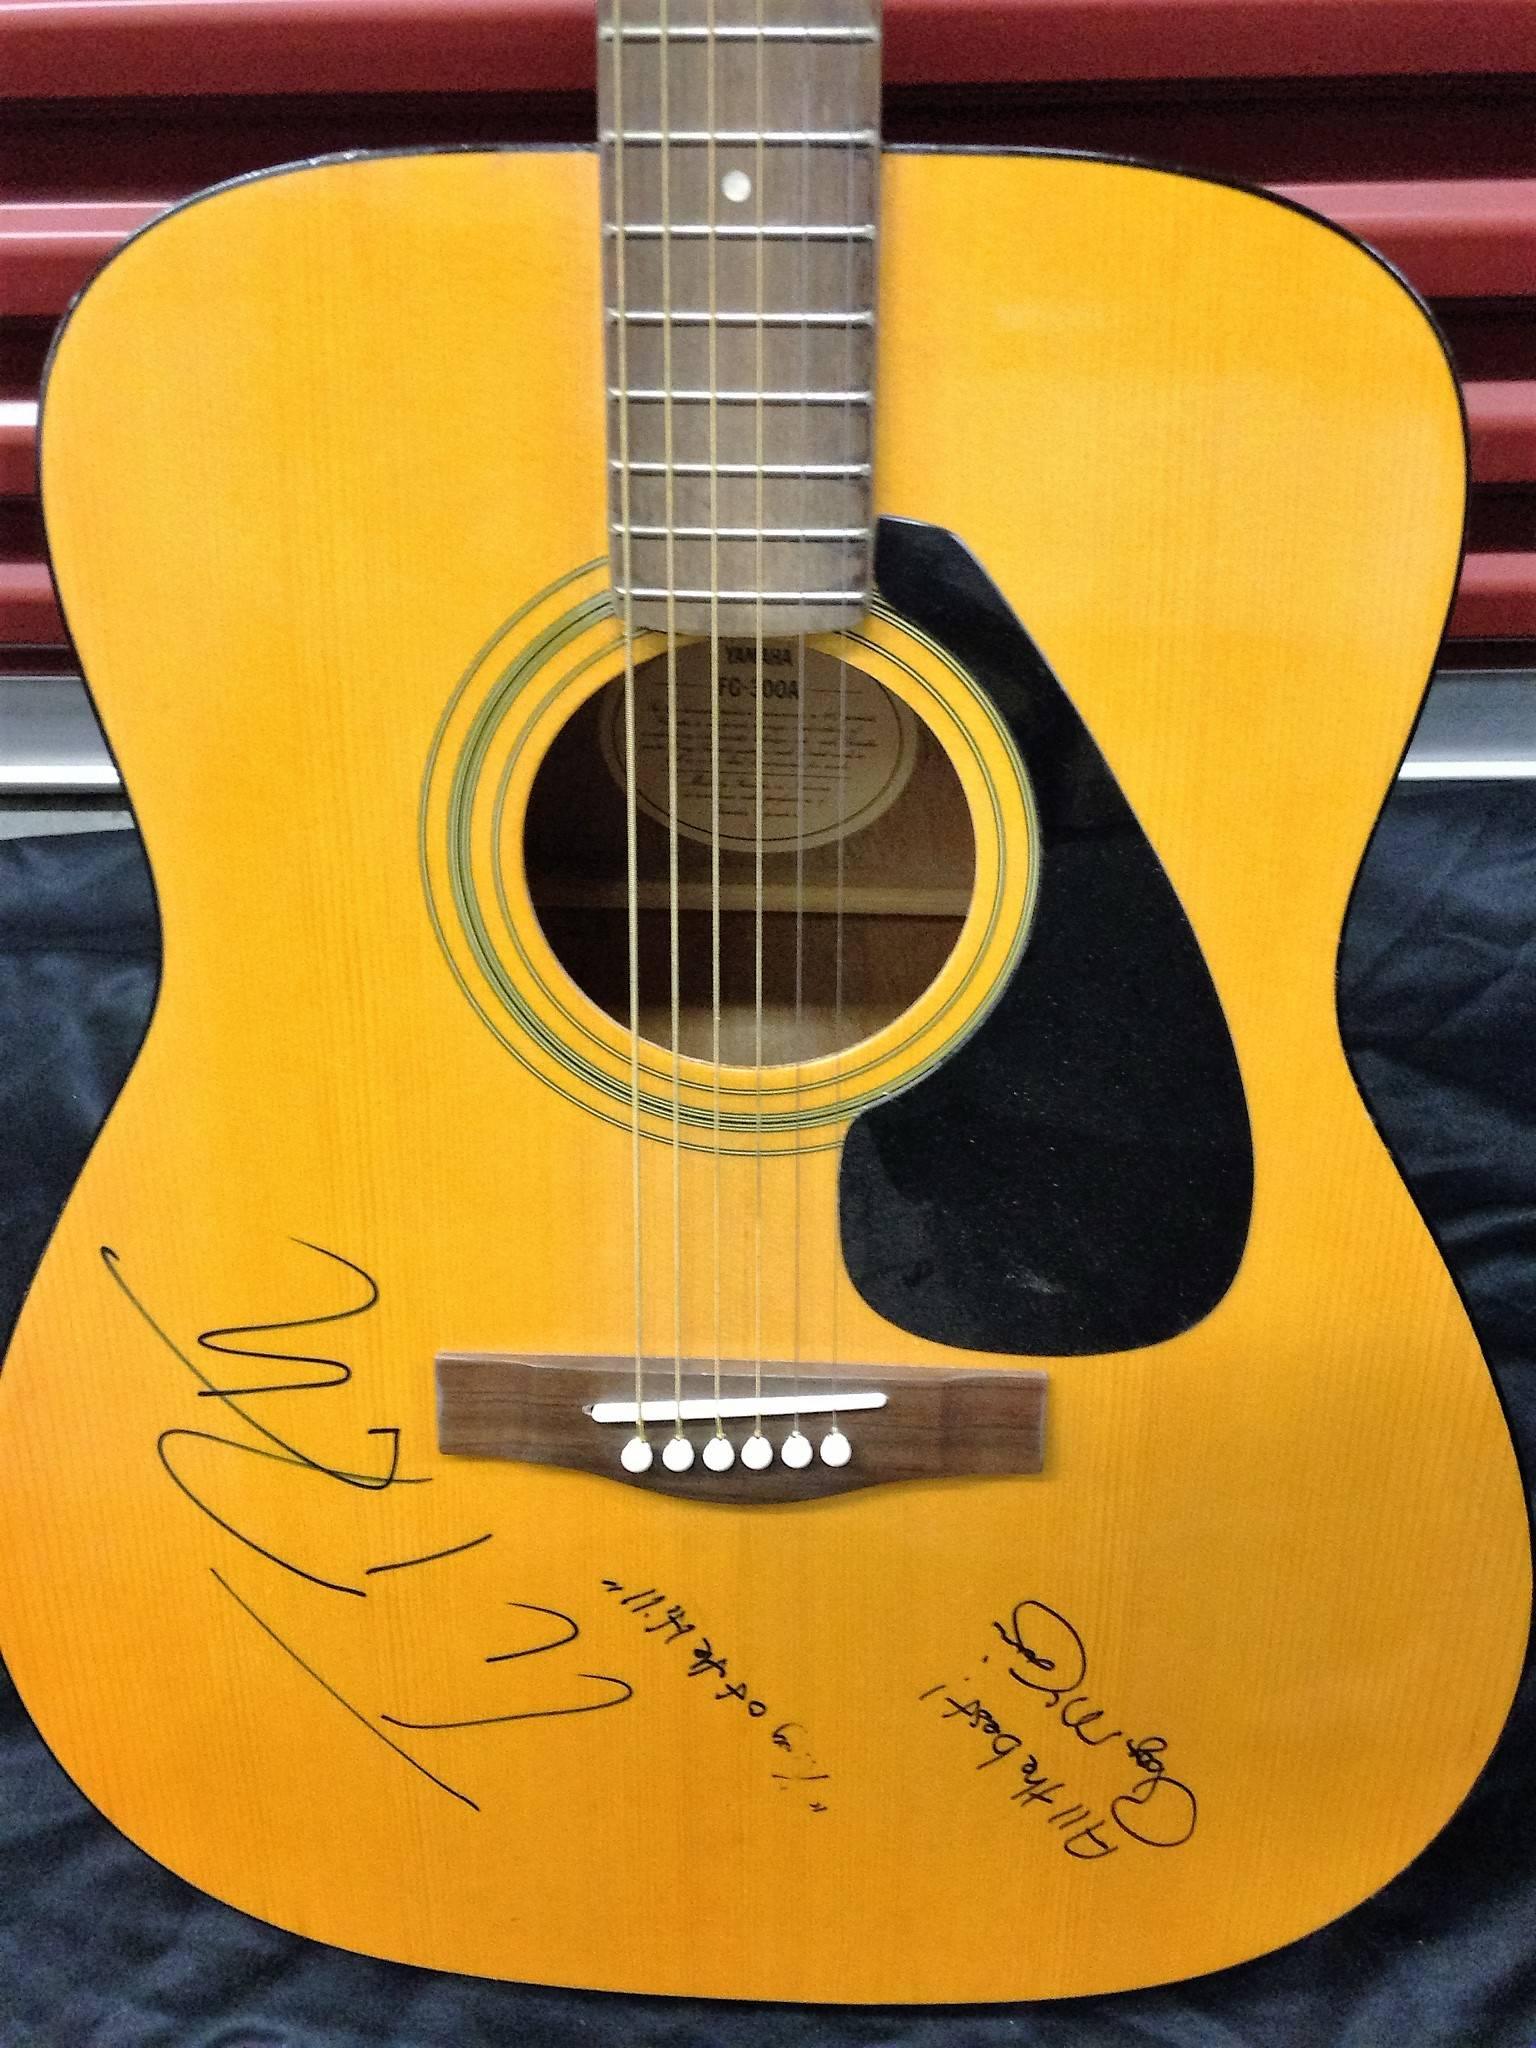 Guitar signed by Tom Petty and Roger McGuinn obtained in person during the 1990s by the seller. This guitar is a Yamaha FG 300 A, made in Indonesia.